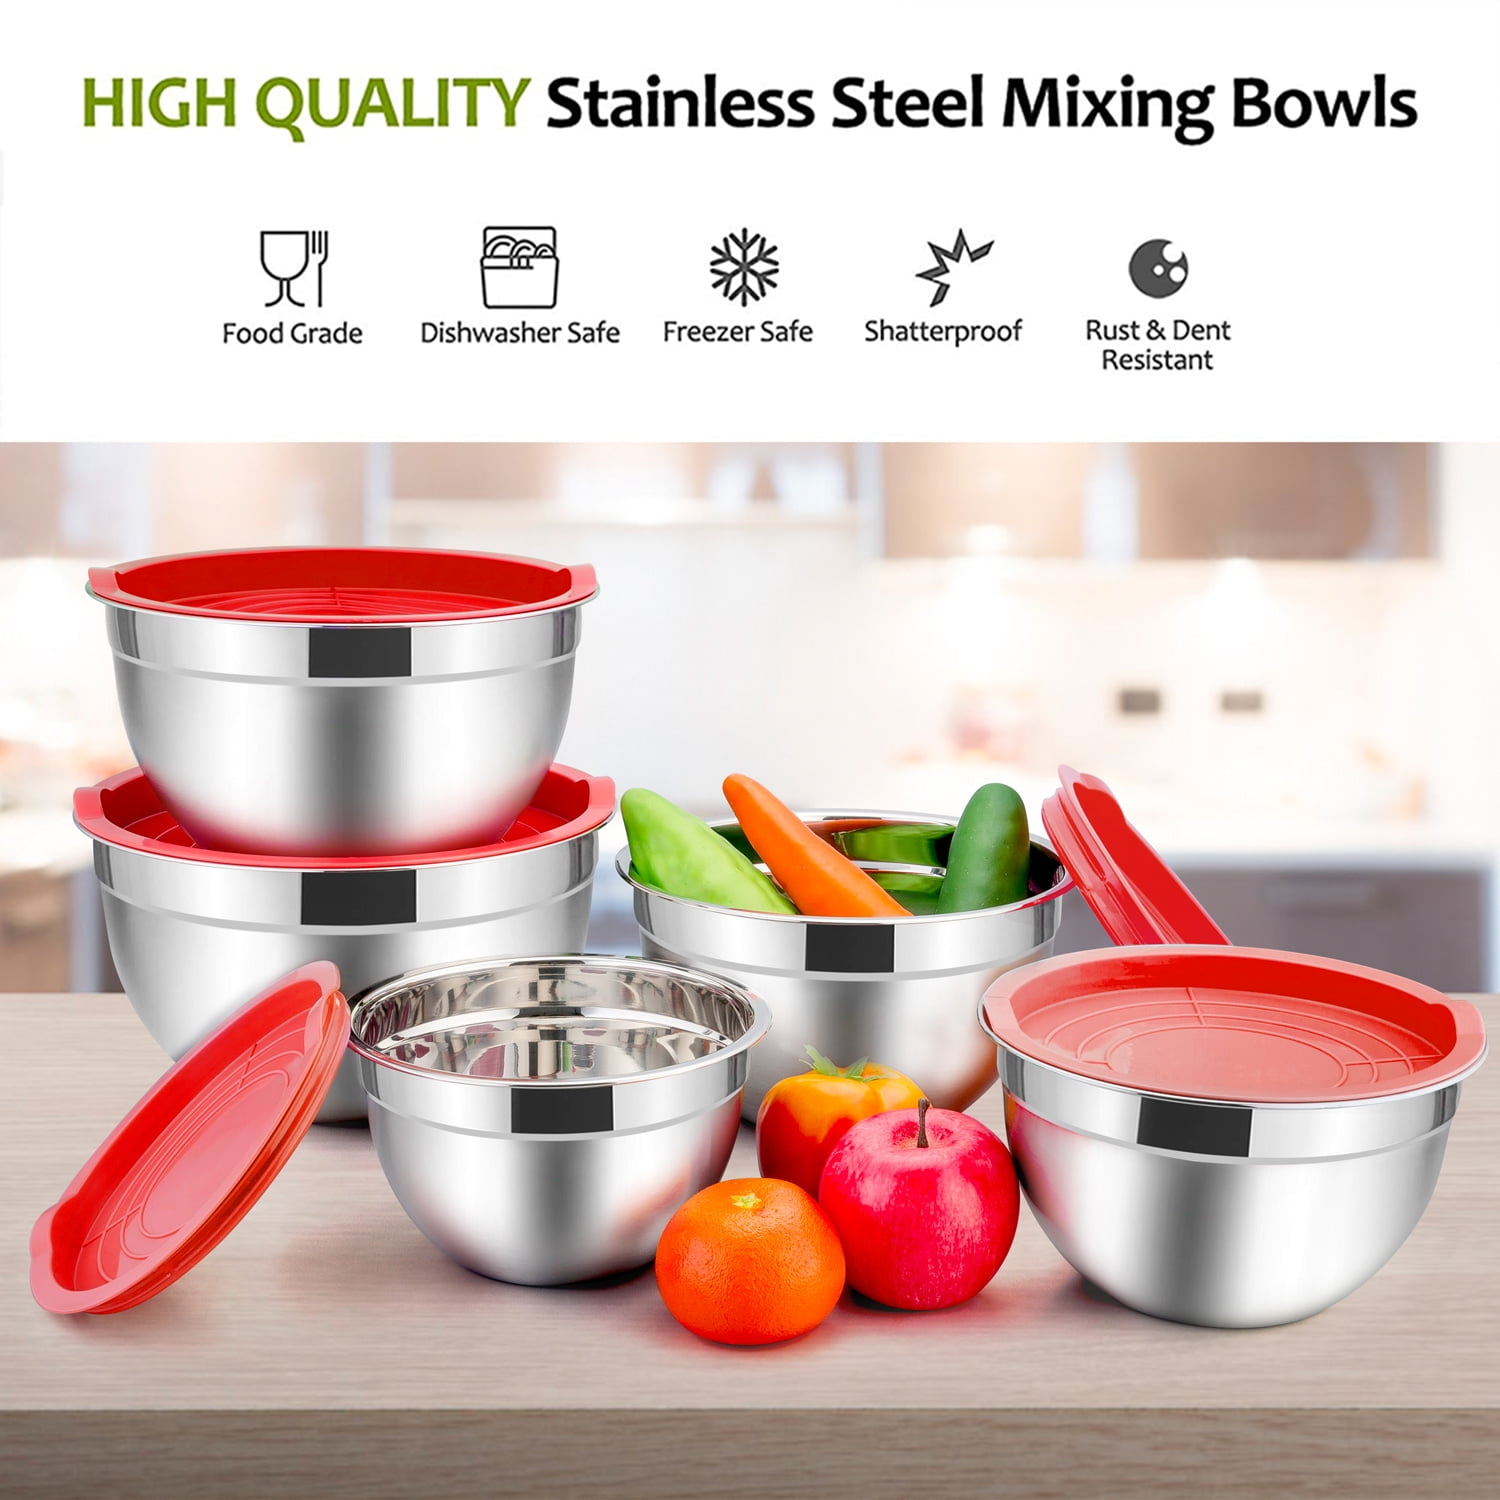 Pinnacle Plate Stainless Steel Mixing Bowls - 5 Pack Nesting Baking  Supplies for Cooking, Serving, Food Prep - Dishwasher Kitchen Set,  Stackable Salad